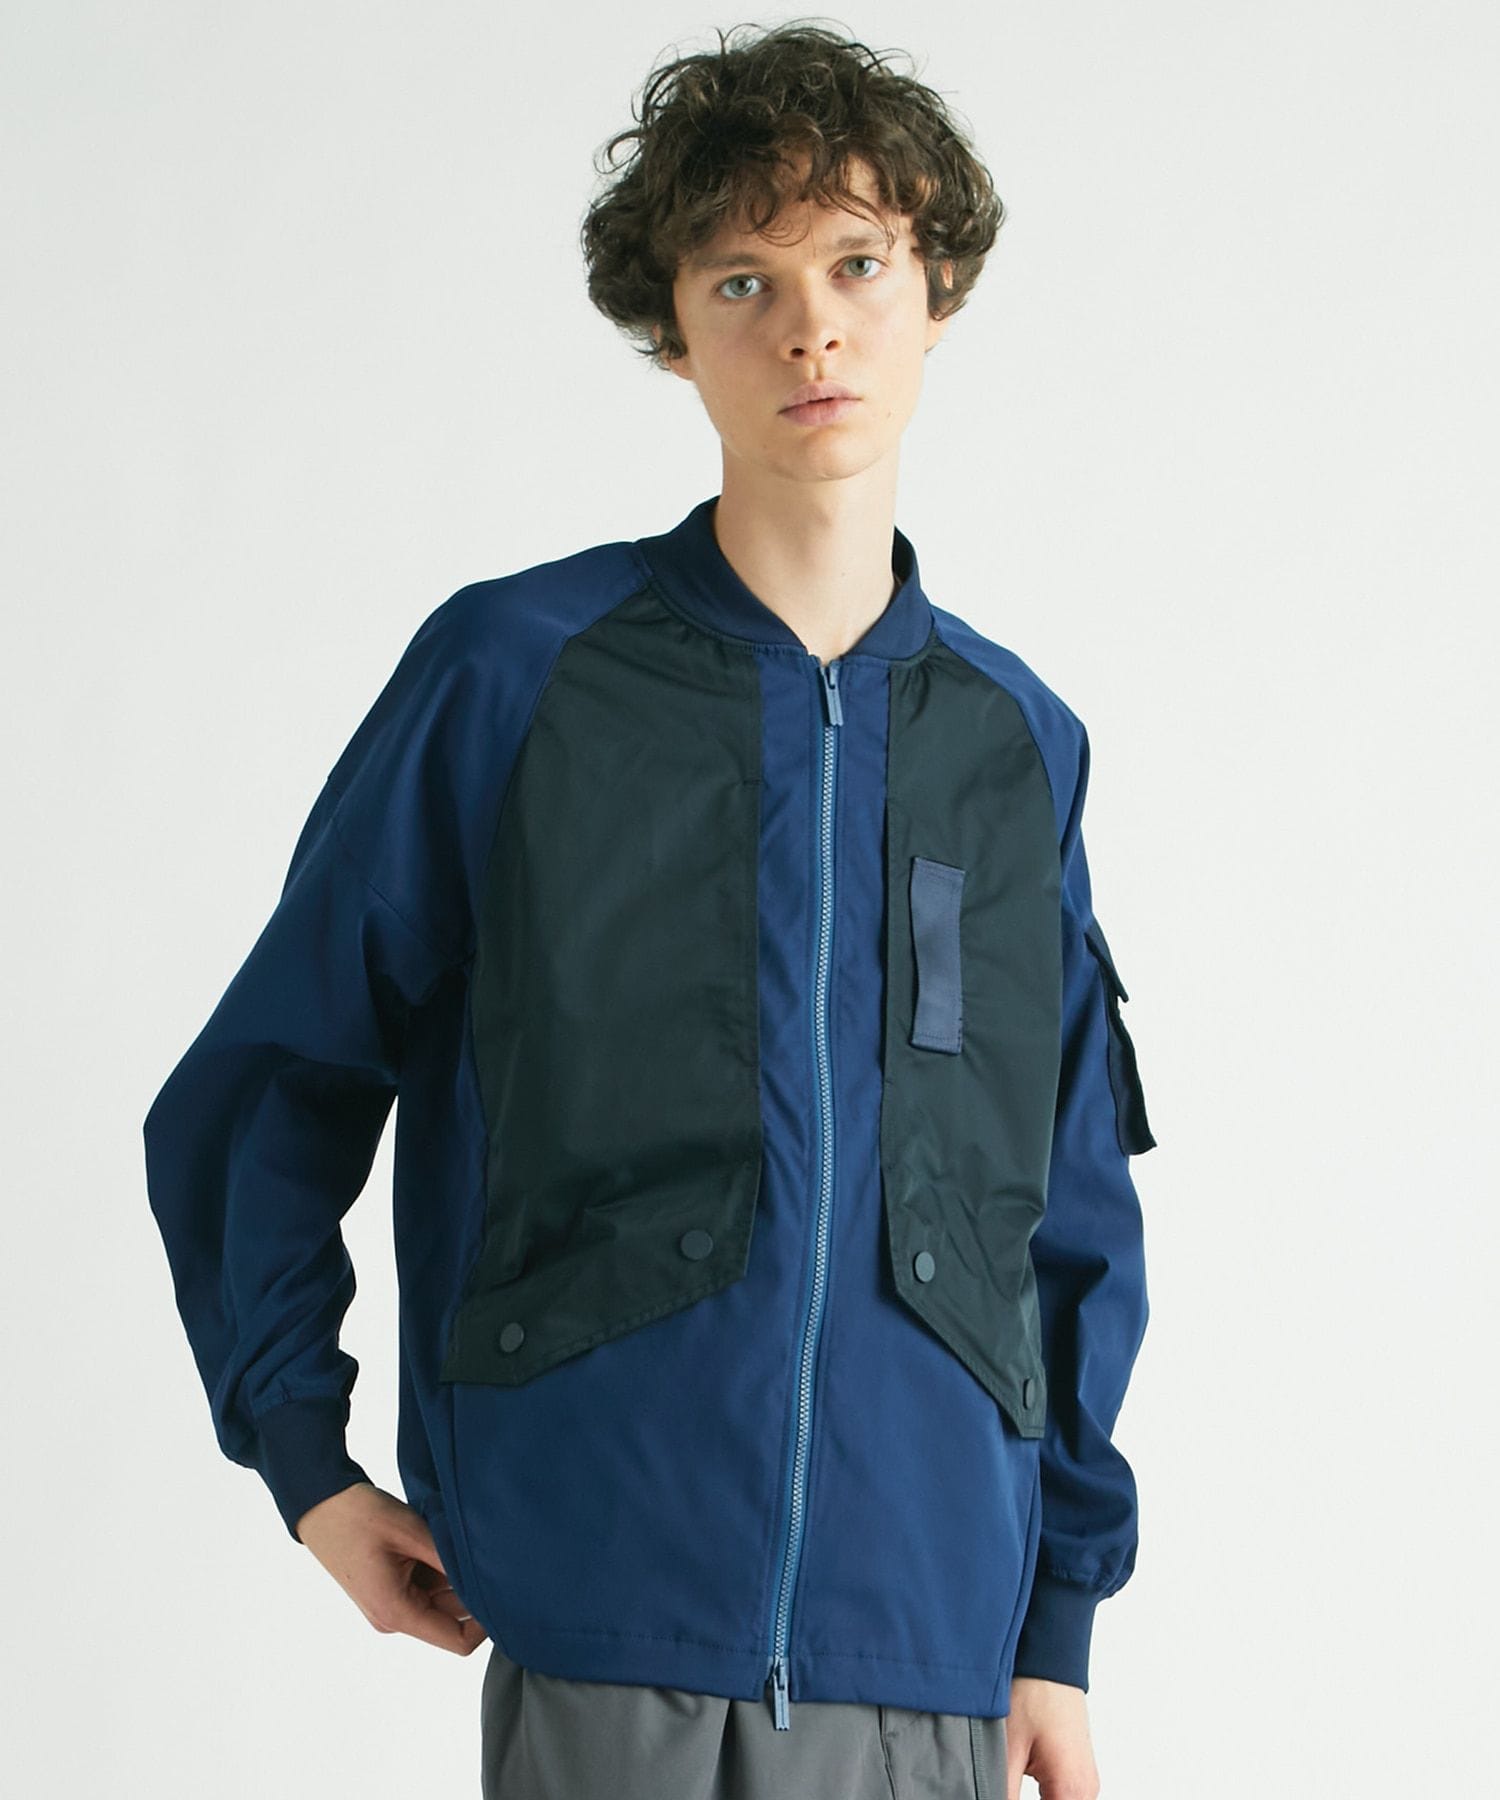 STRETCHED TWILLED JACKET White Mountaineering